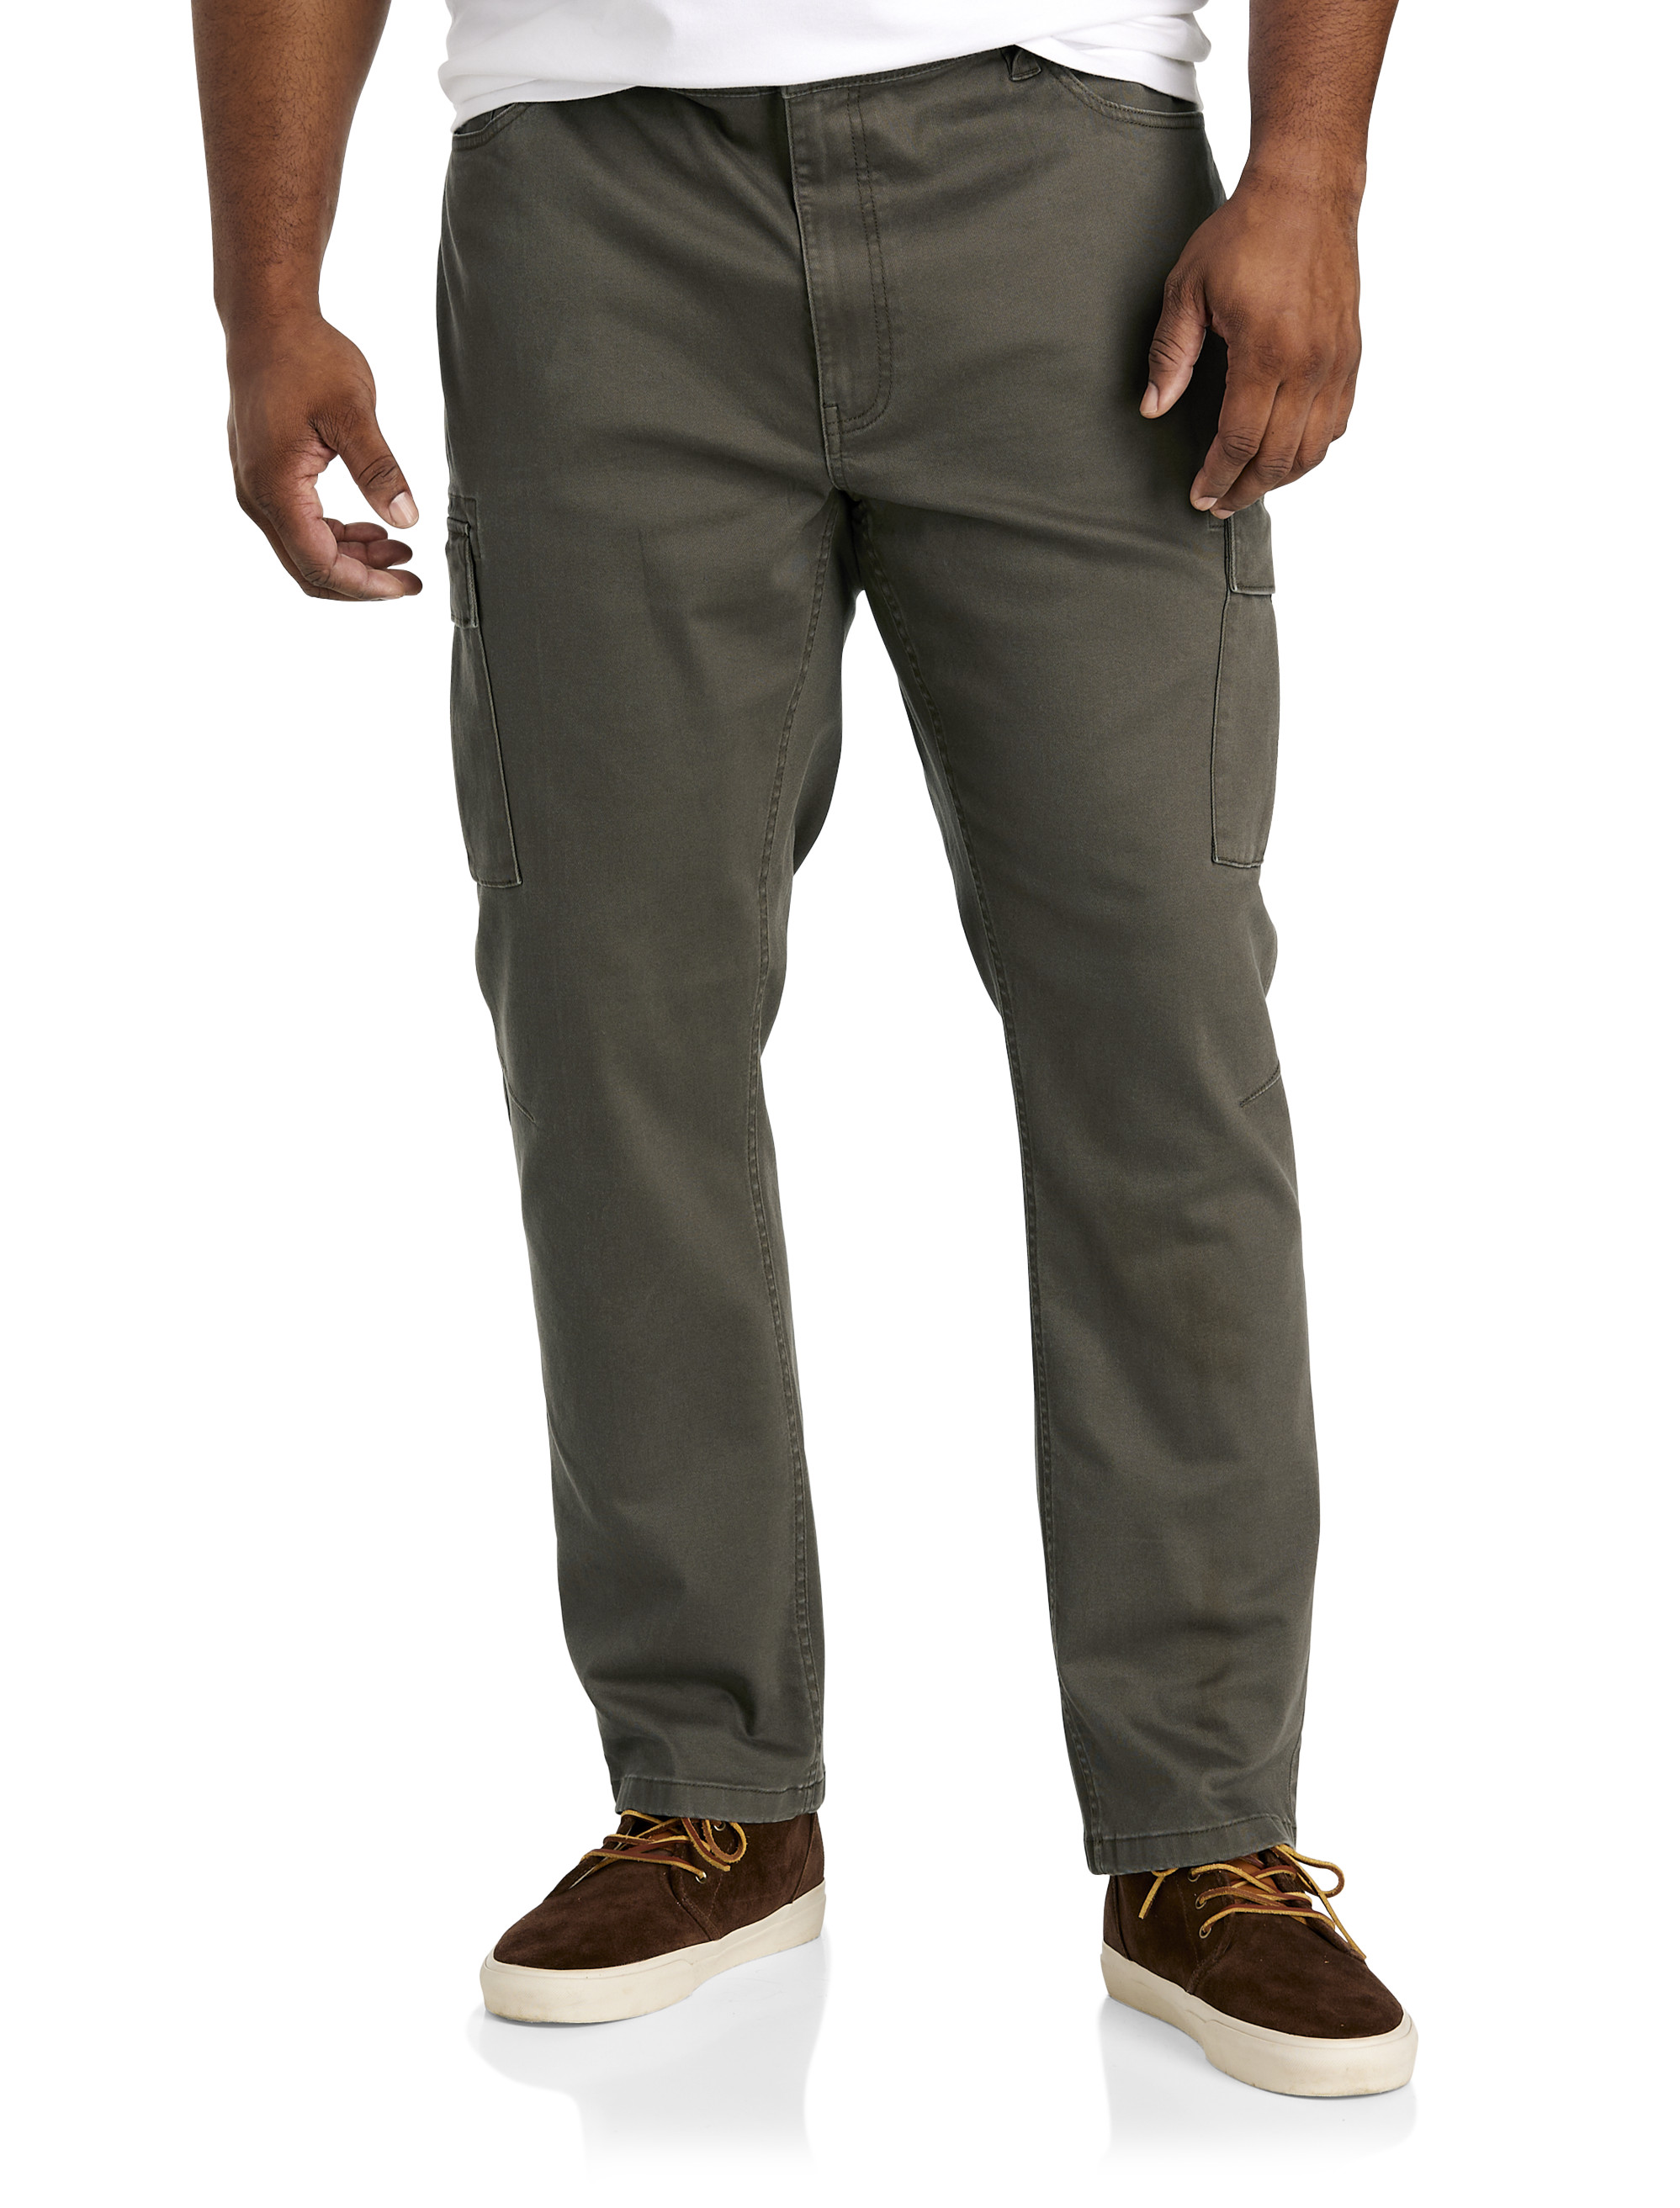 True Nation by DXL Men's Big and Tall Garment Dyed Stretch Twill Pants  Dusty Olive 42 x 28 at  Men's Clothing store